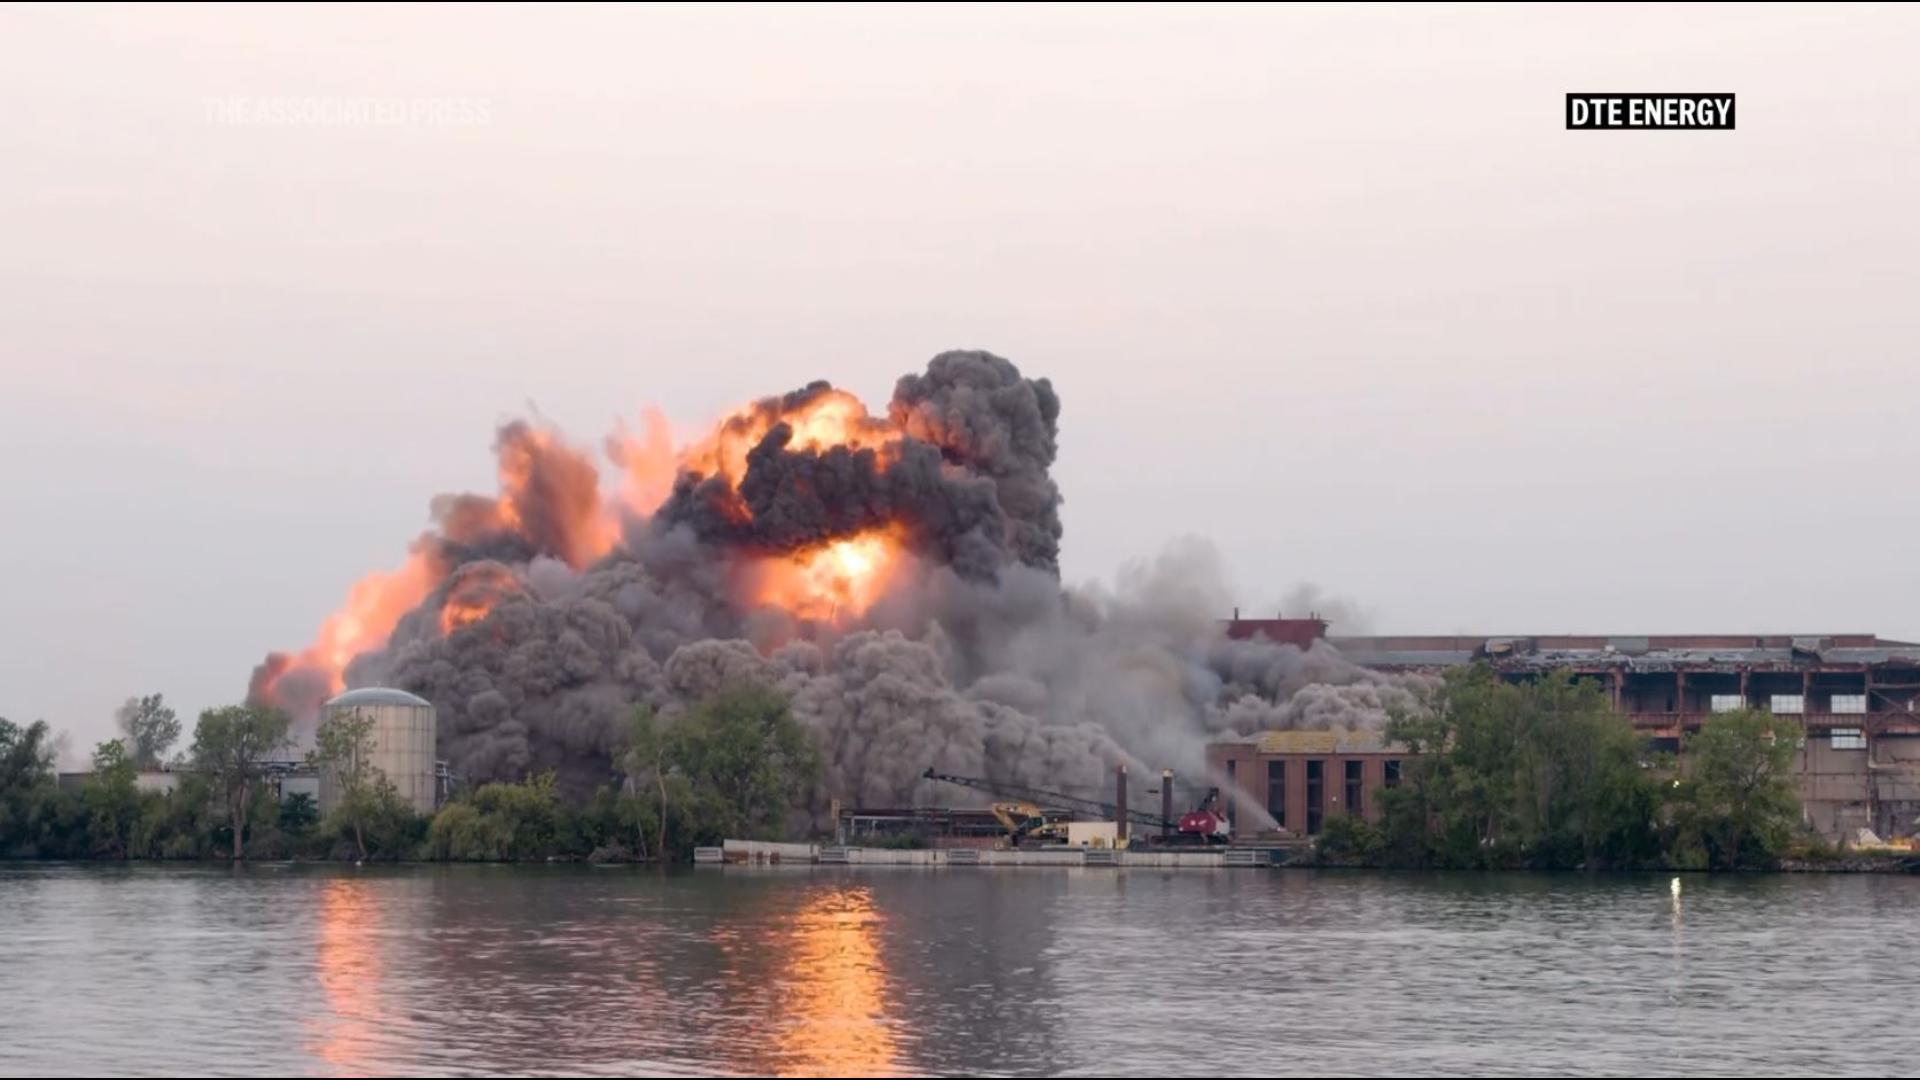 Part of a shuttered power plant near Detroit was demolished Friday by explosives that turned the structure into piles of rubble and kicked up dust and flames.